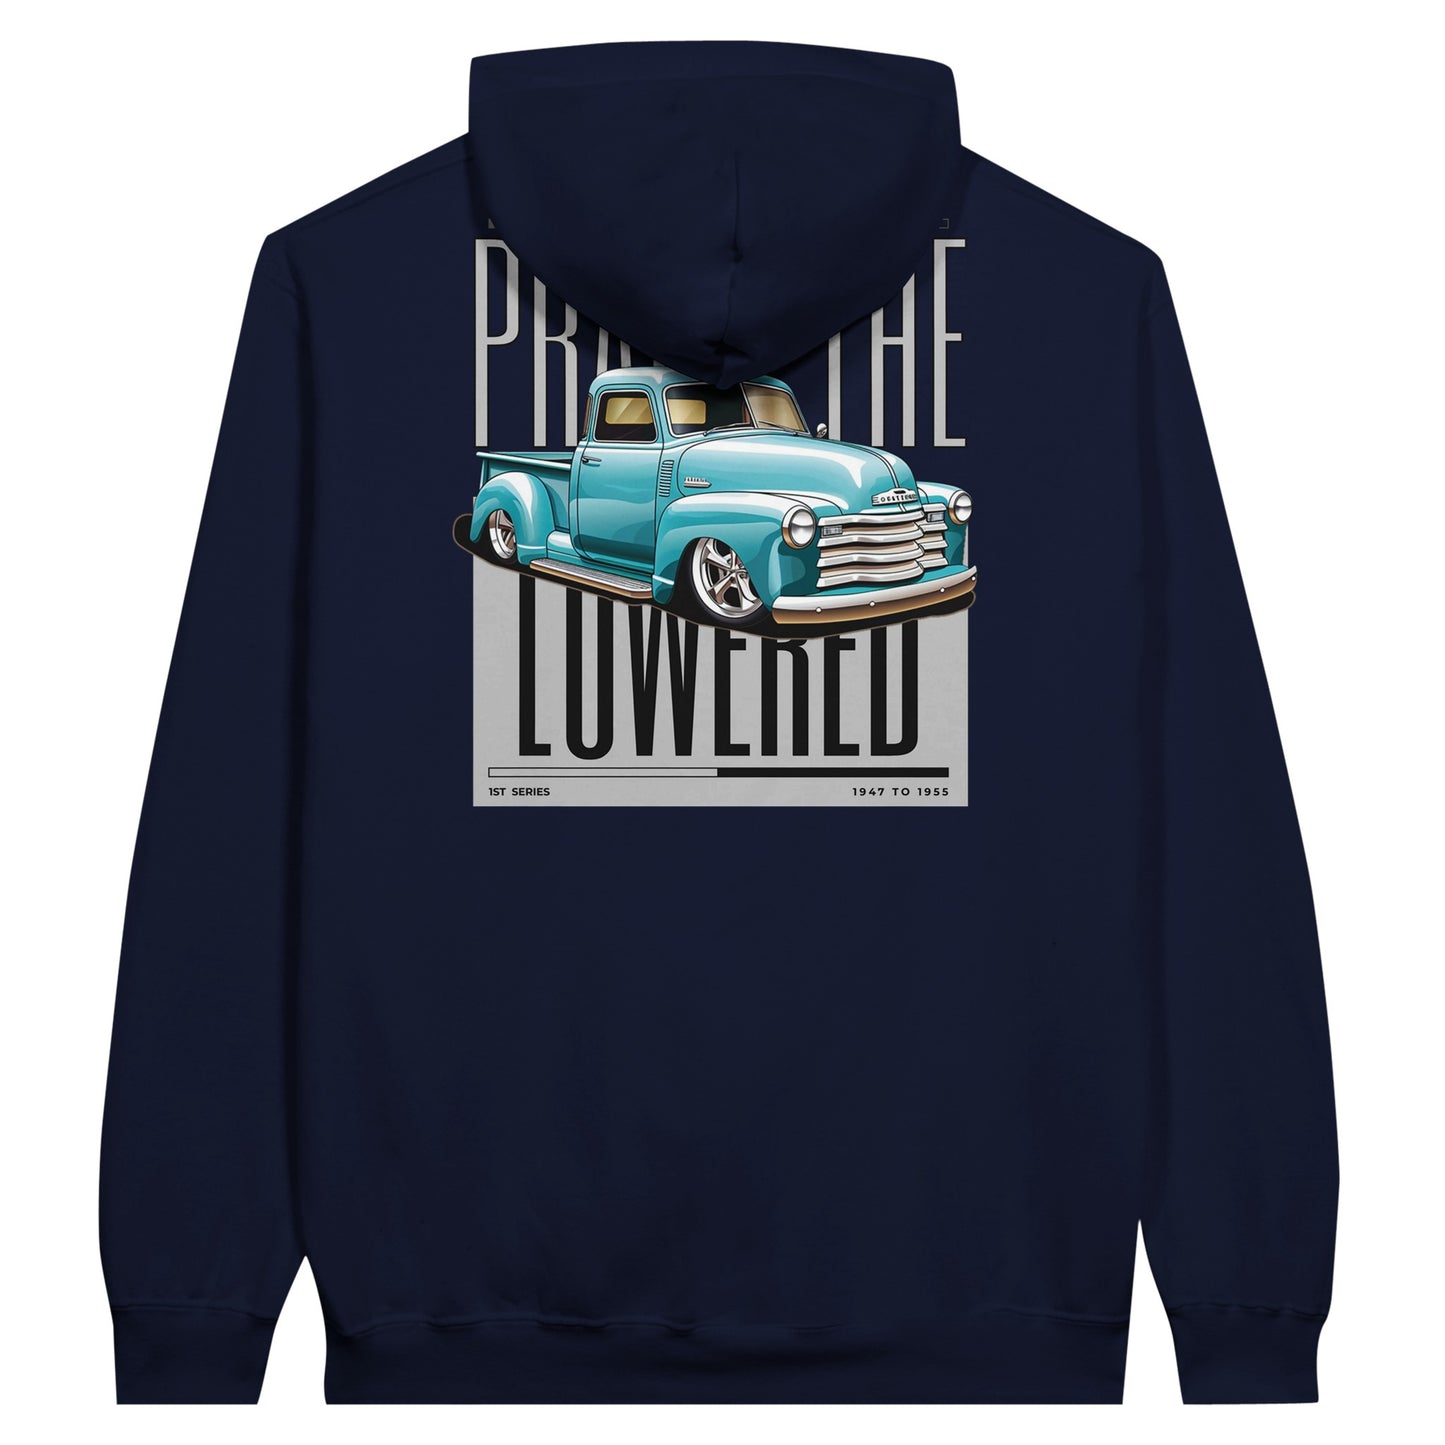 Praise the Lowered Pullover Hoodie - Mister Snarky's